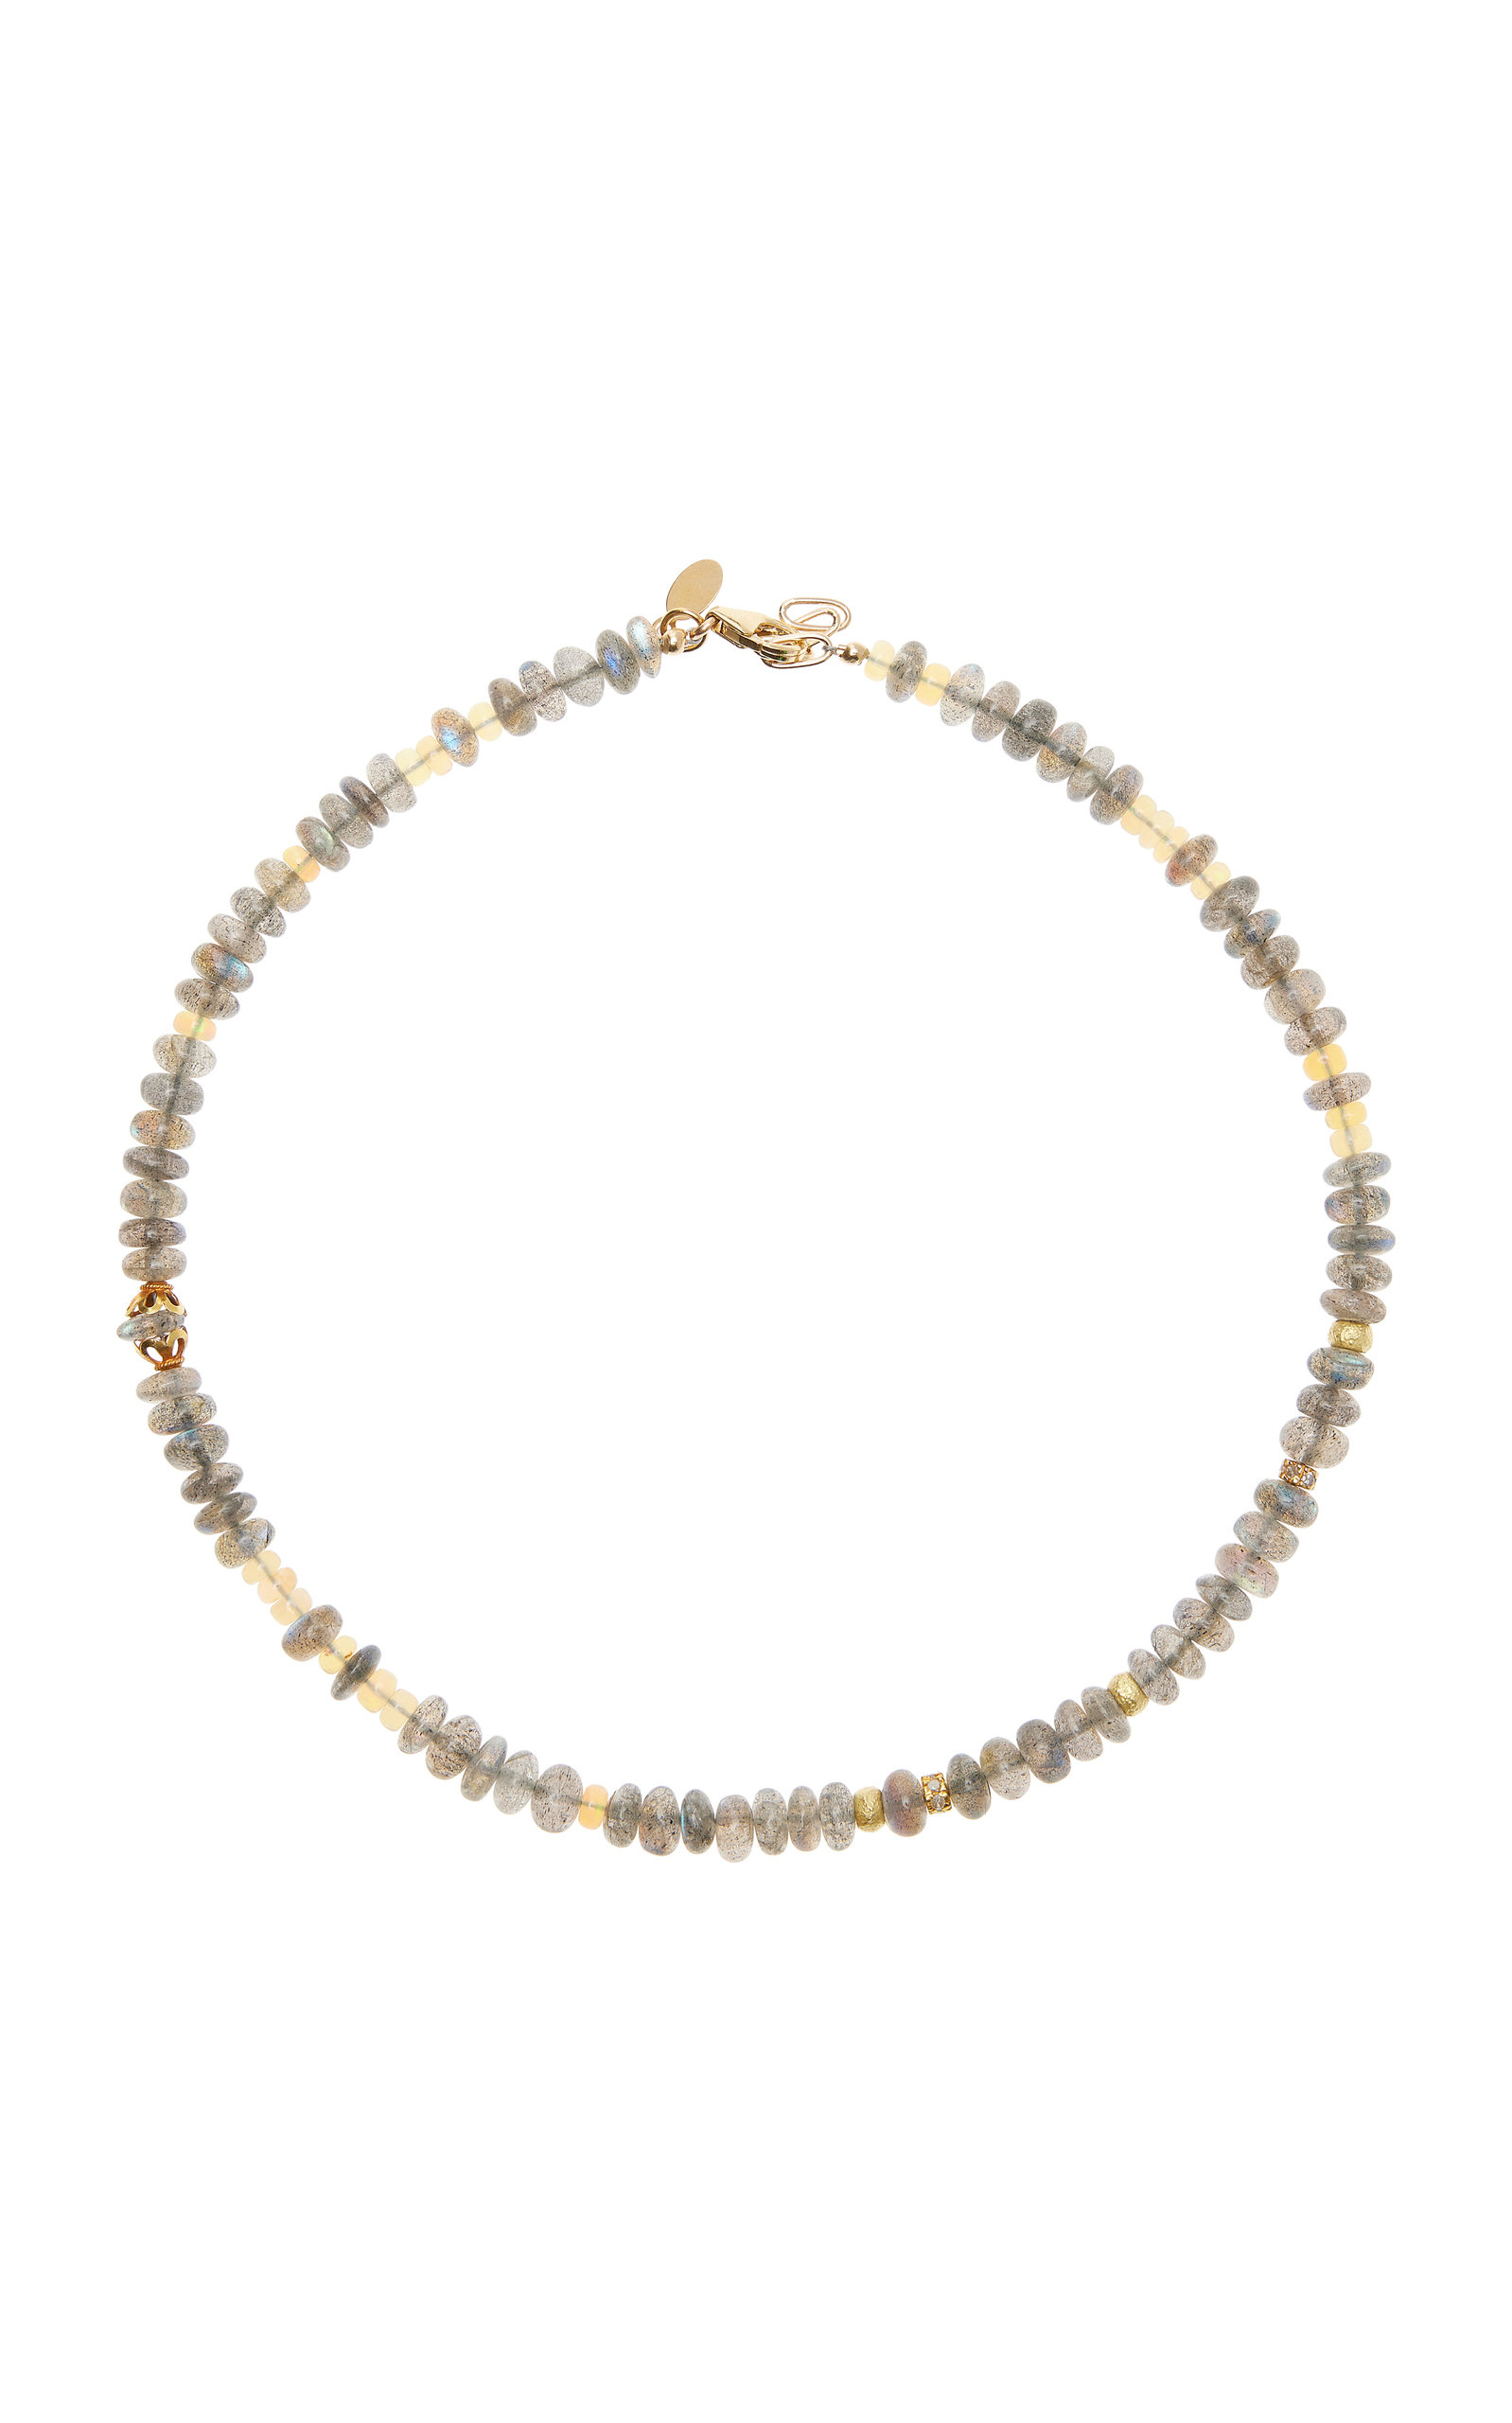 Joie DiGiovanni Women's Smooth Sunset 14K Gold Wrap Necklace